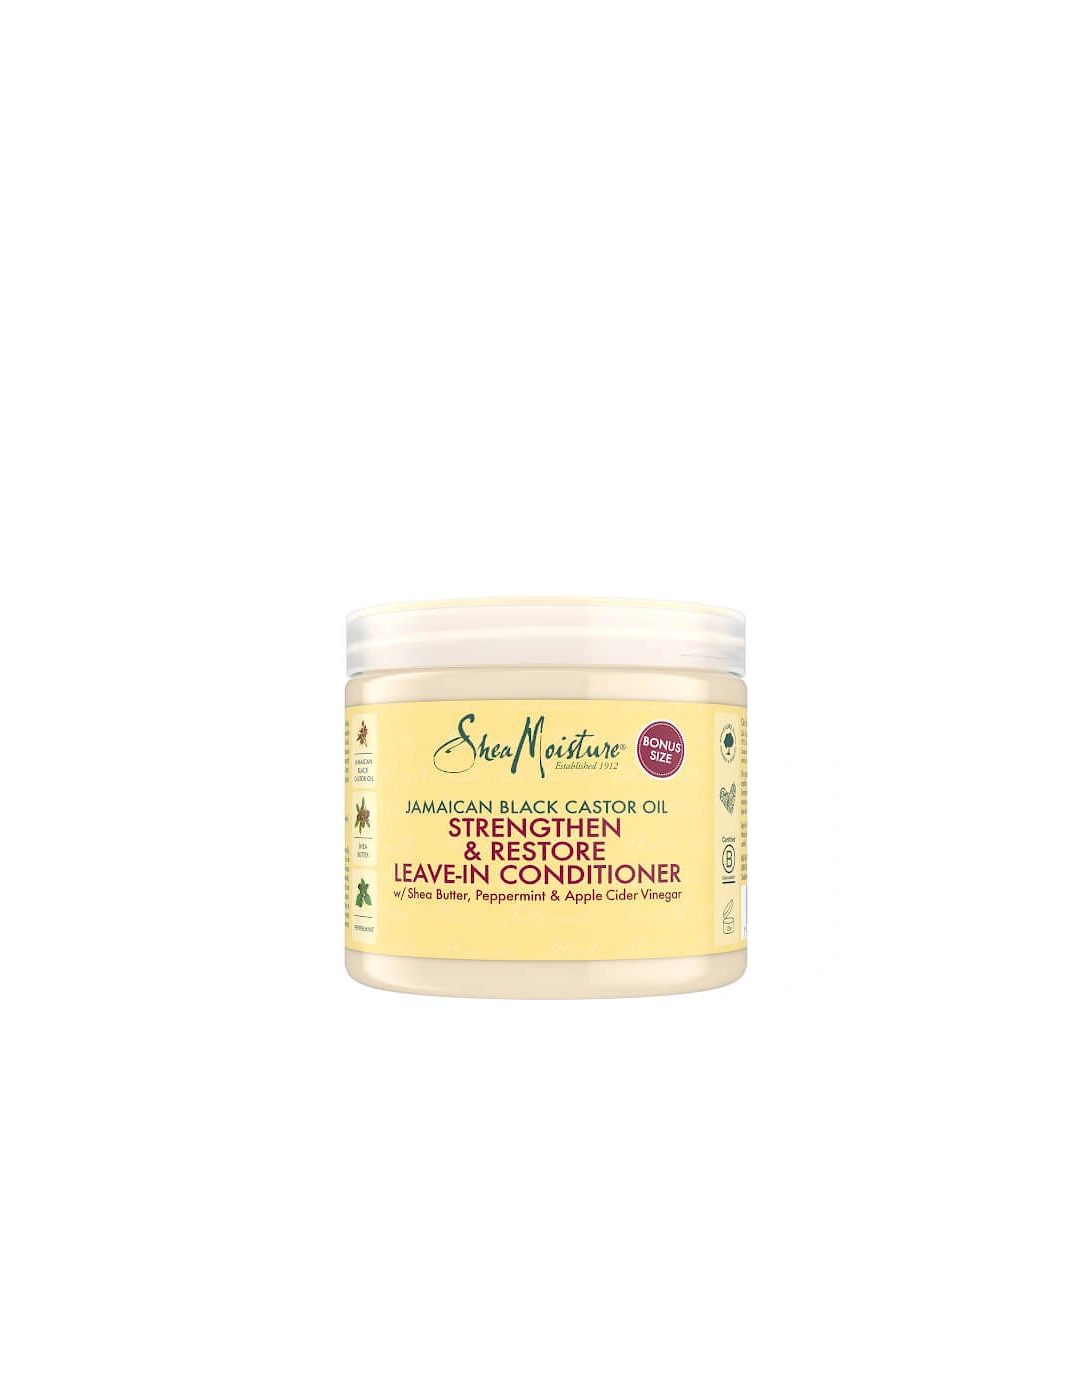 Jamaican Black Castor Oil Strengthen, Grow & Restore Leave-In Conditioner 431ml - SheaMoisture, 2 of 1